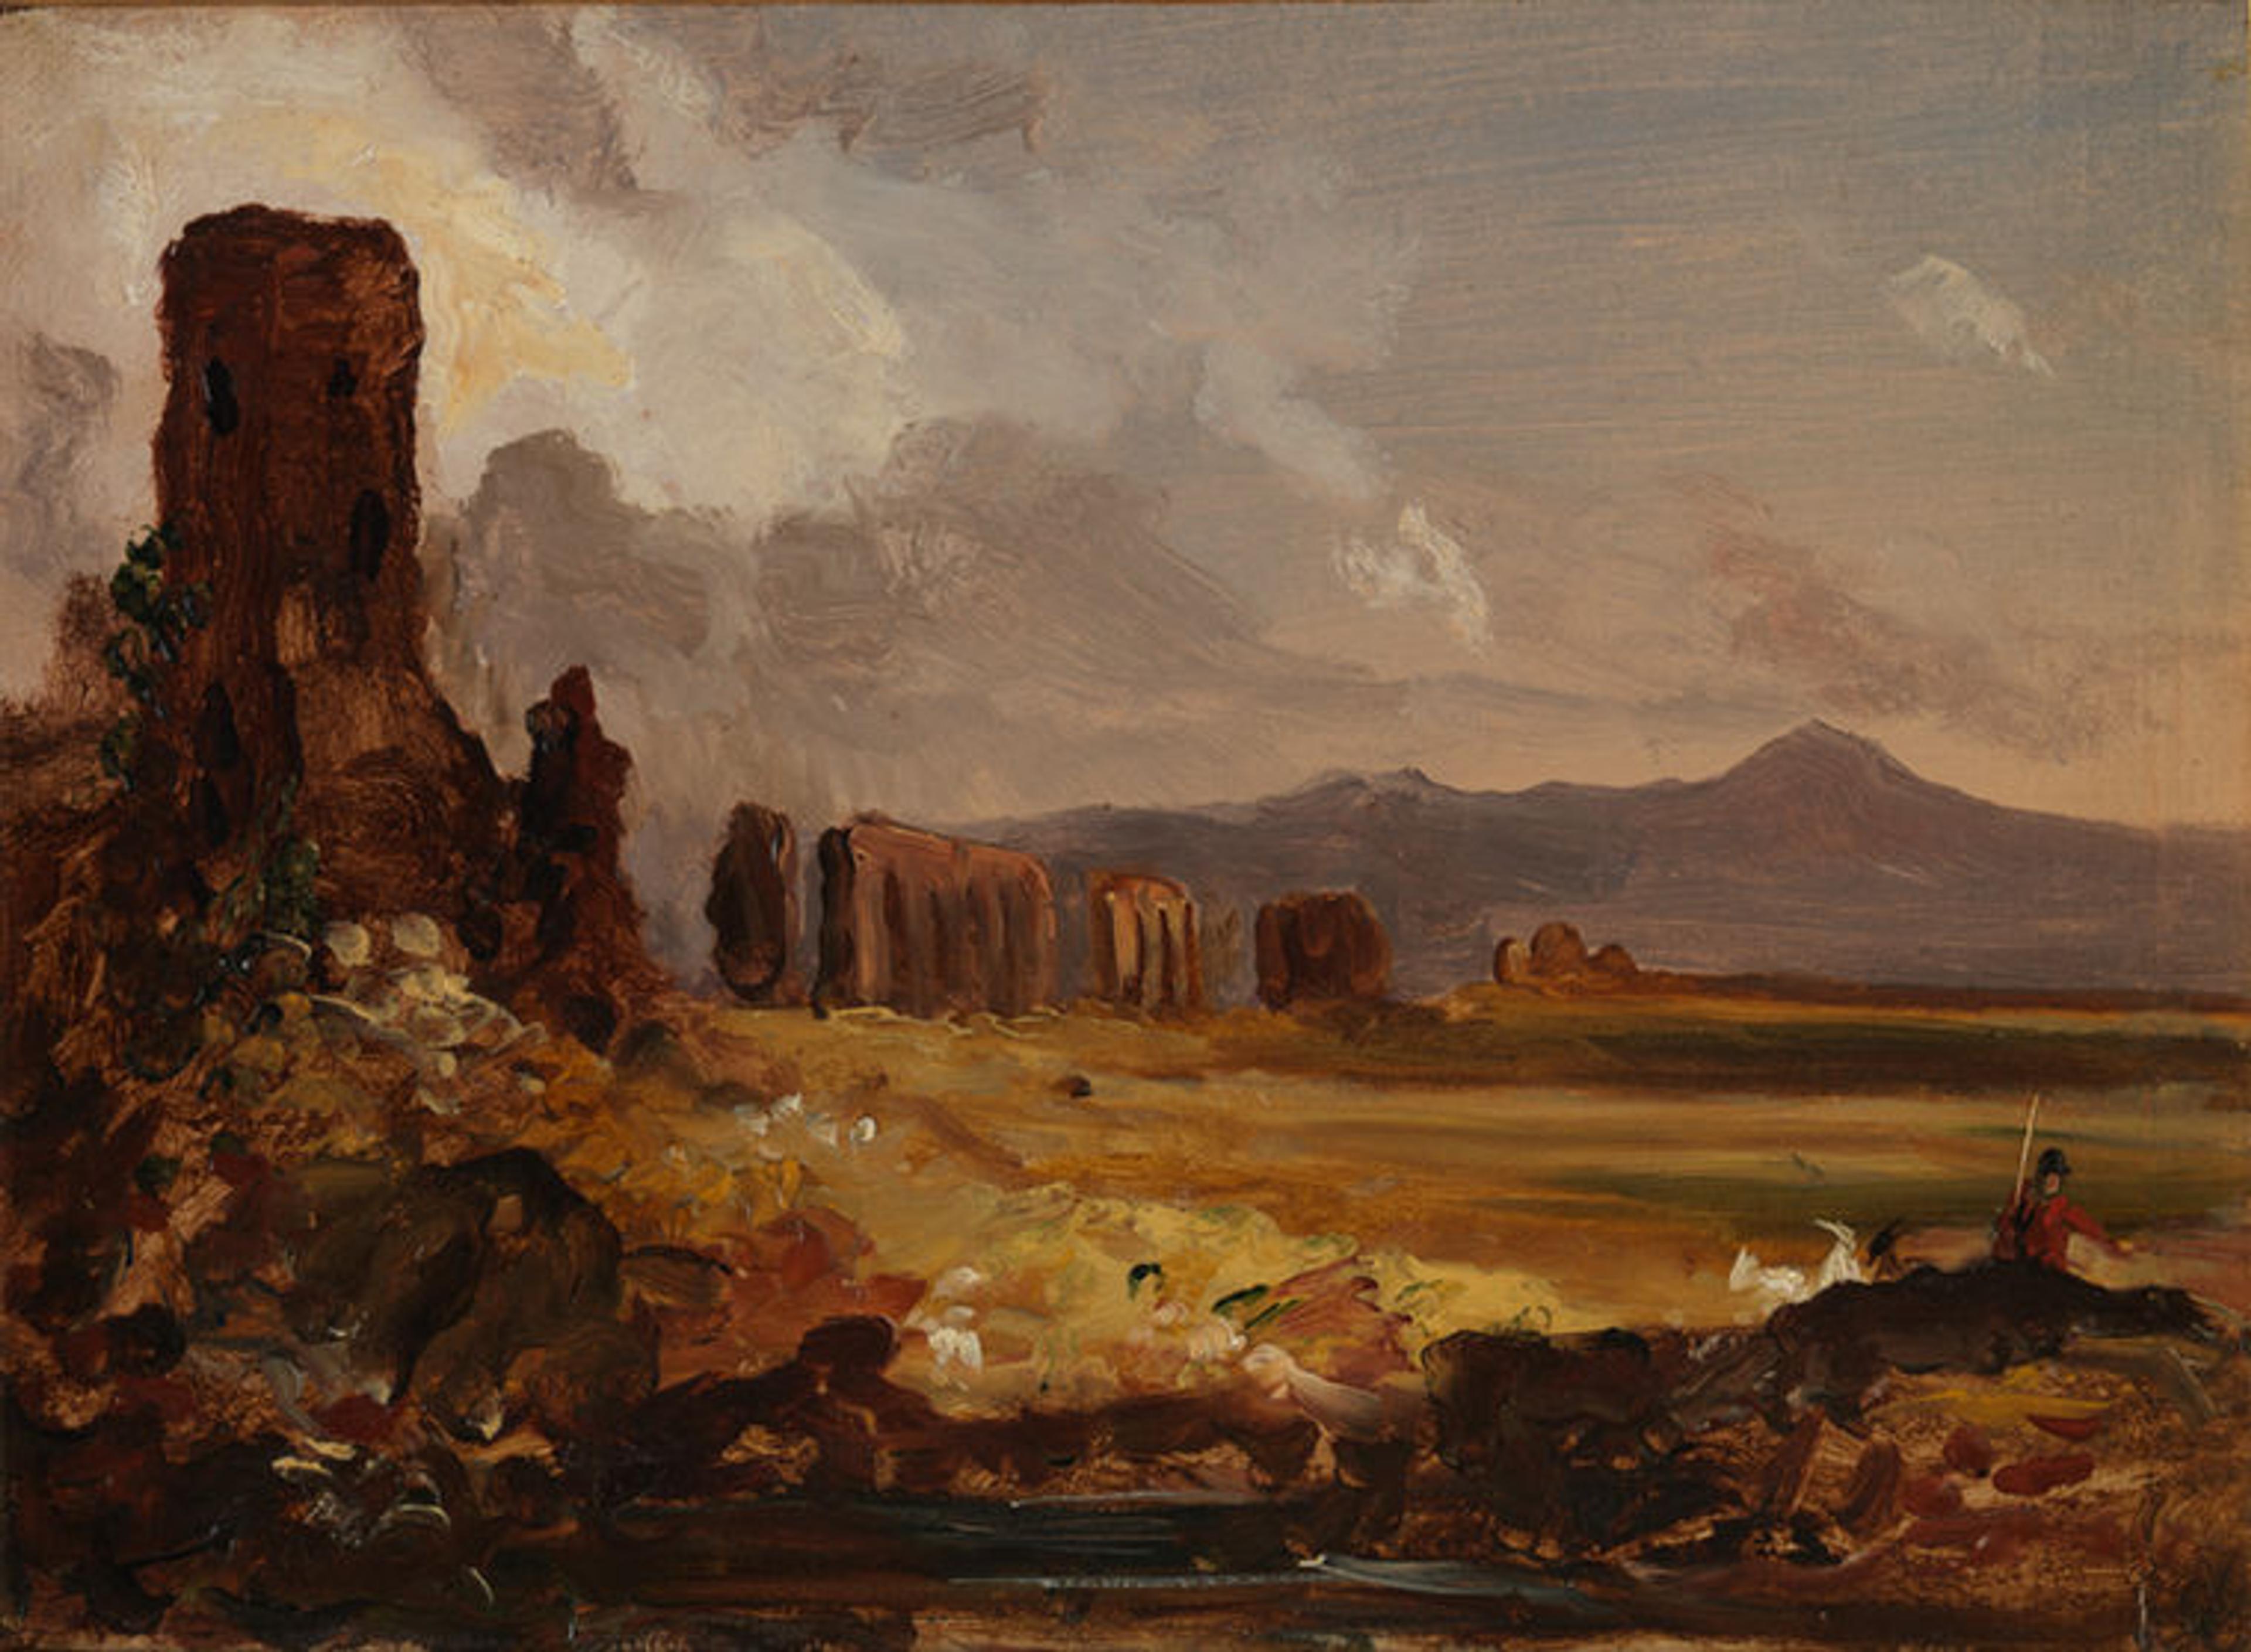 Tracing Thomas Cole's footsteps at The Met